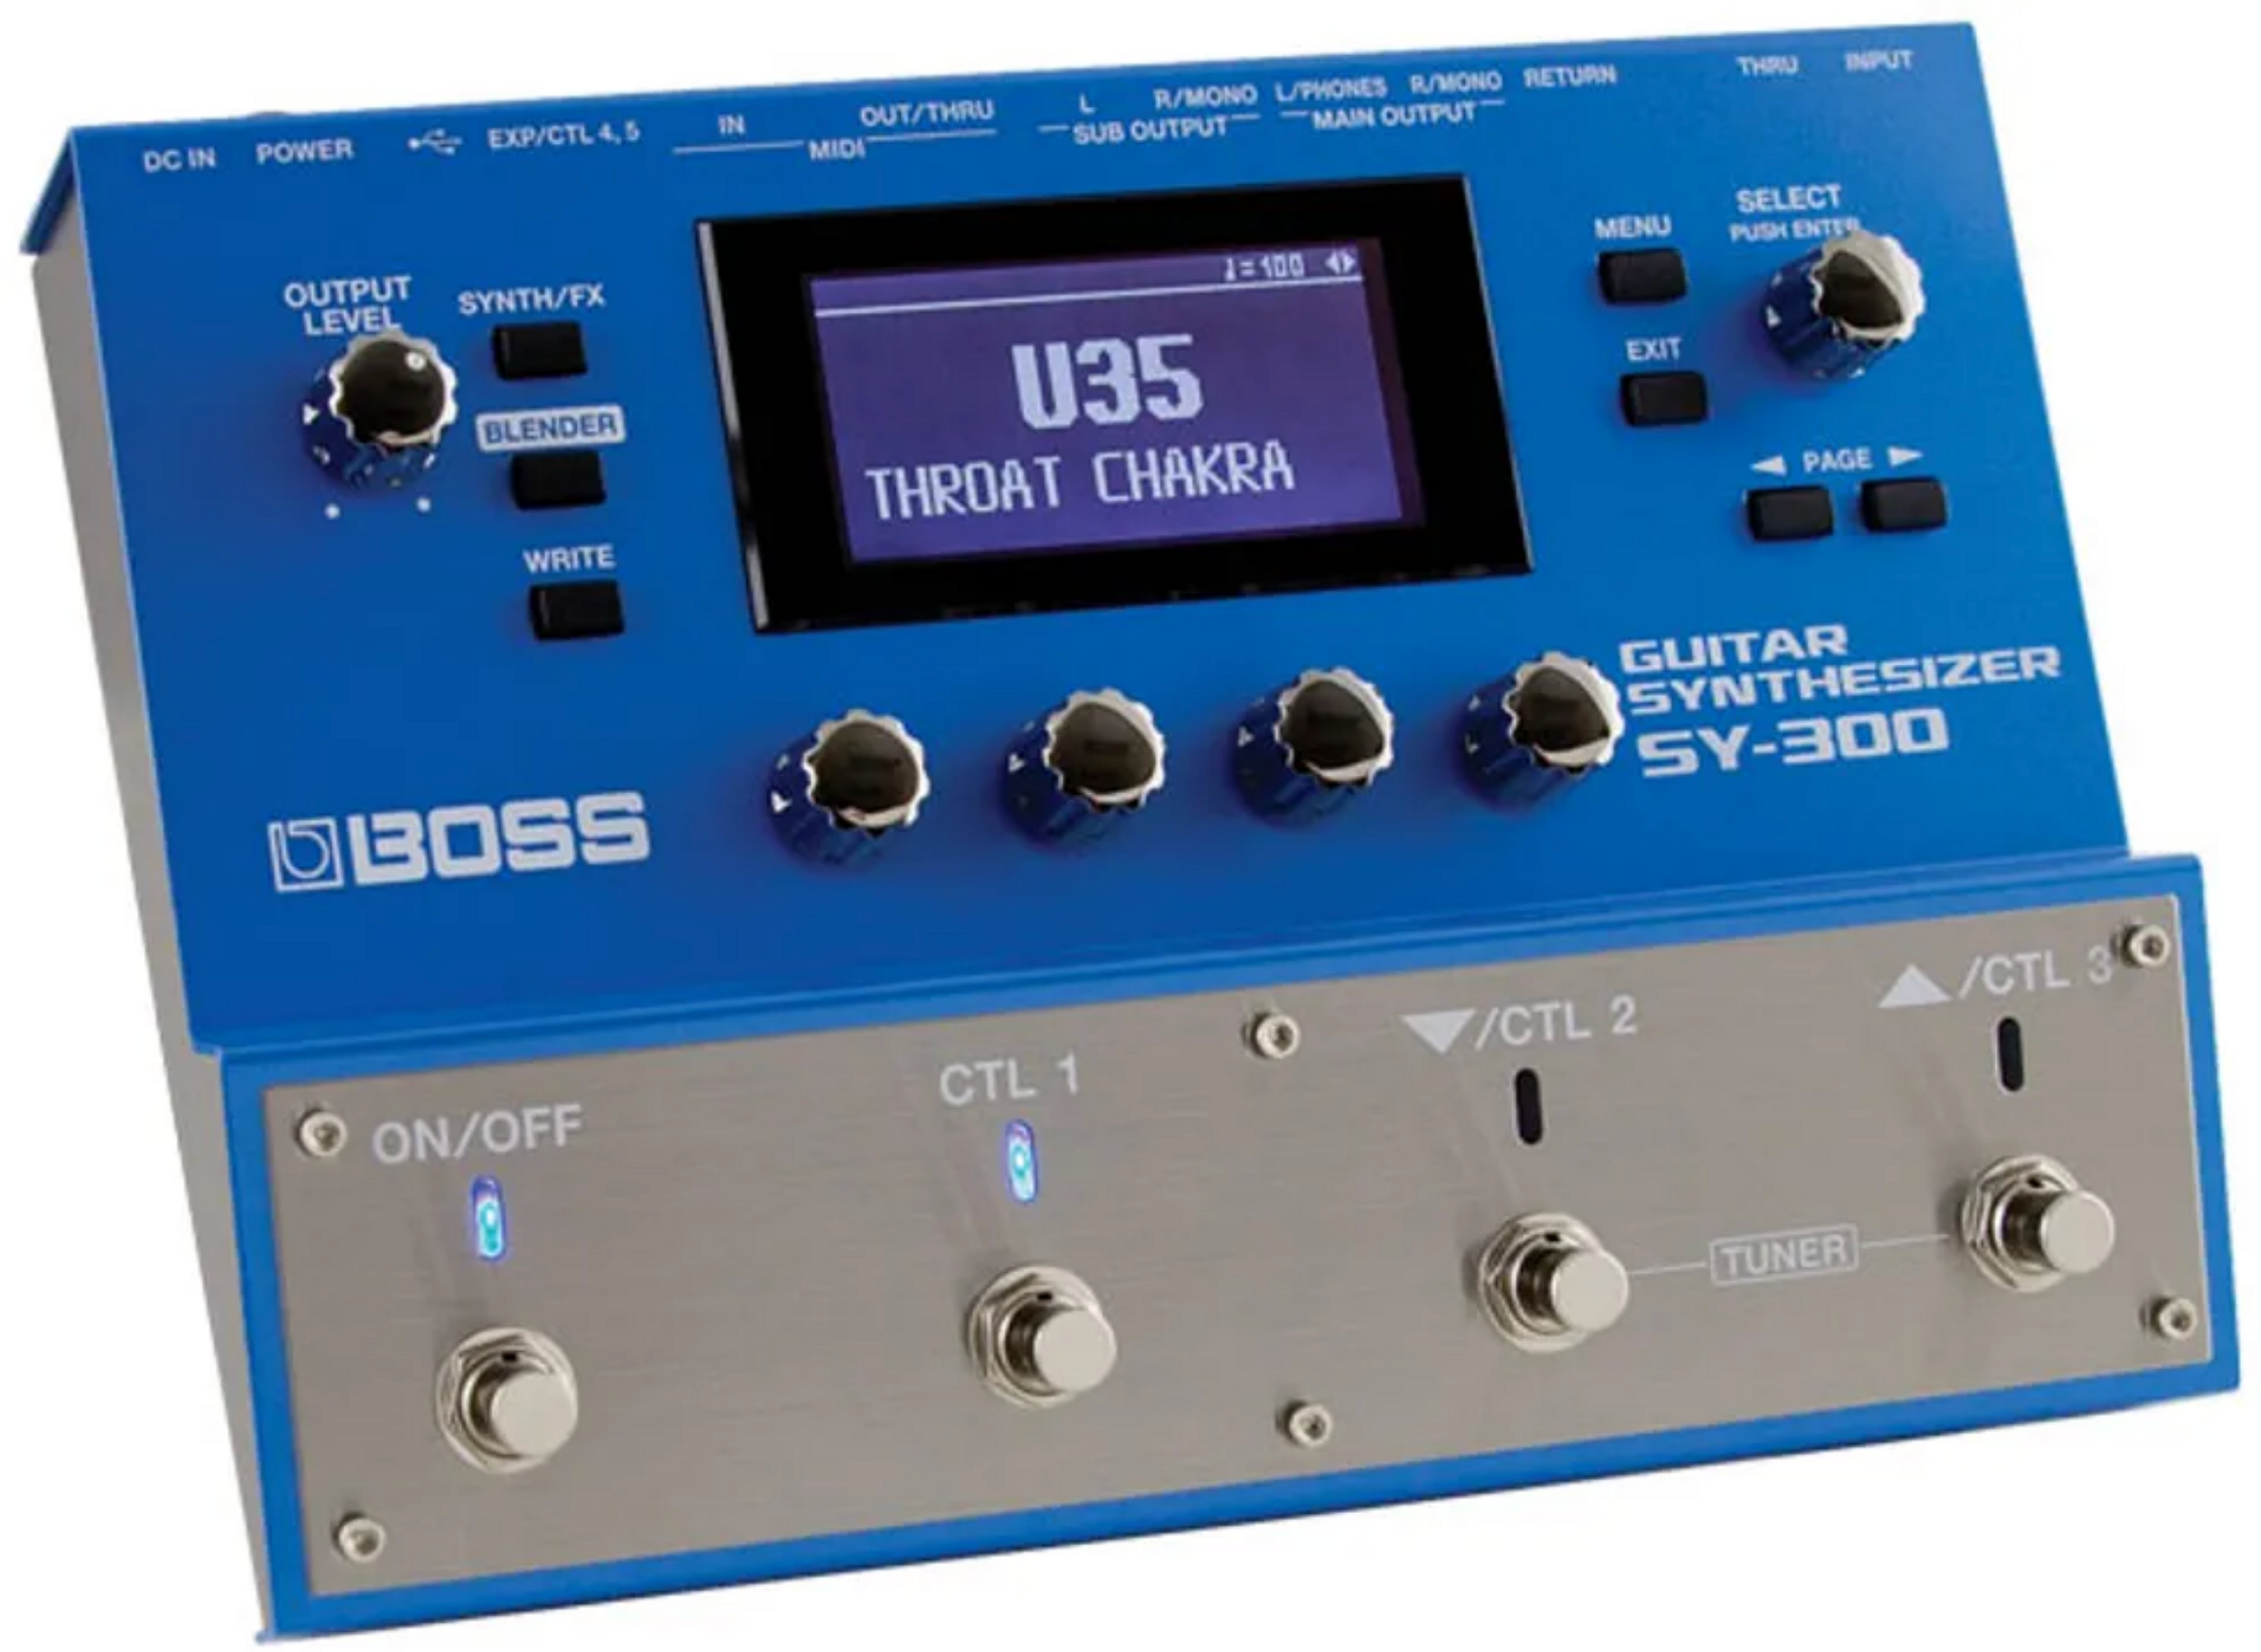 Boss SY-300 Guitar Synthesizer Review